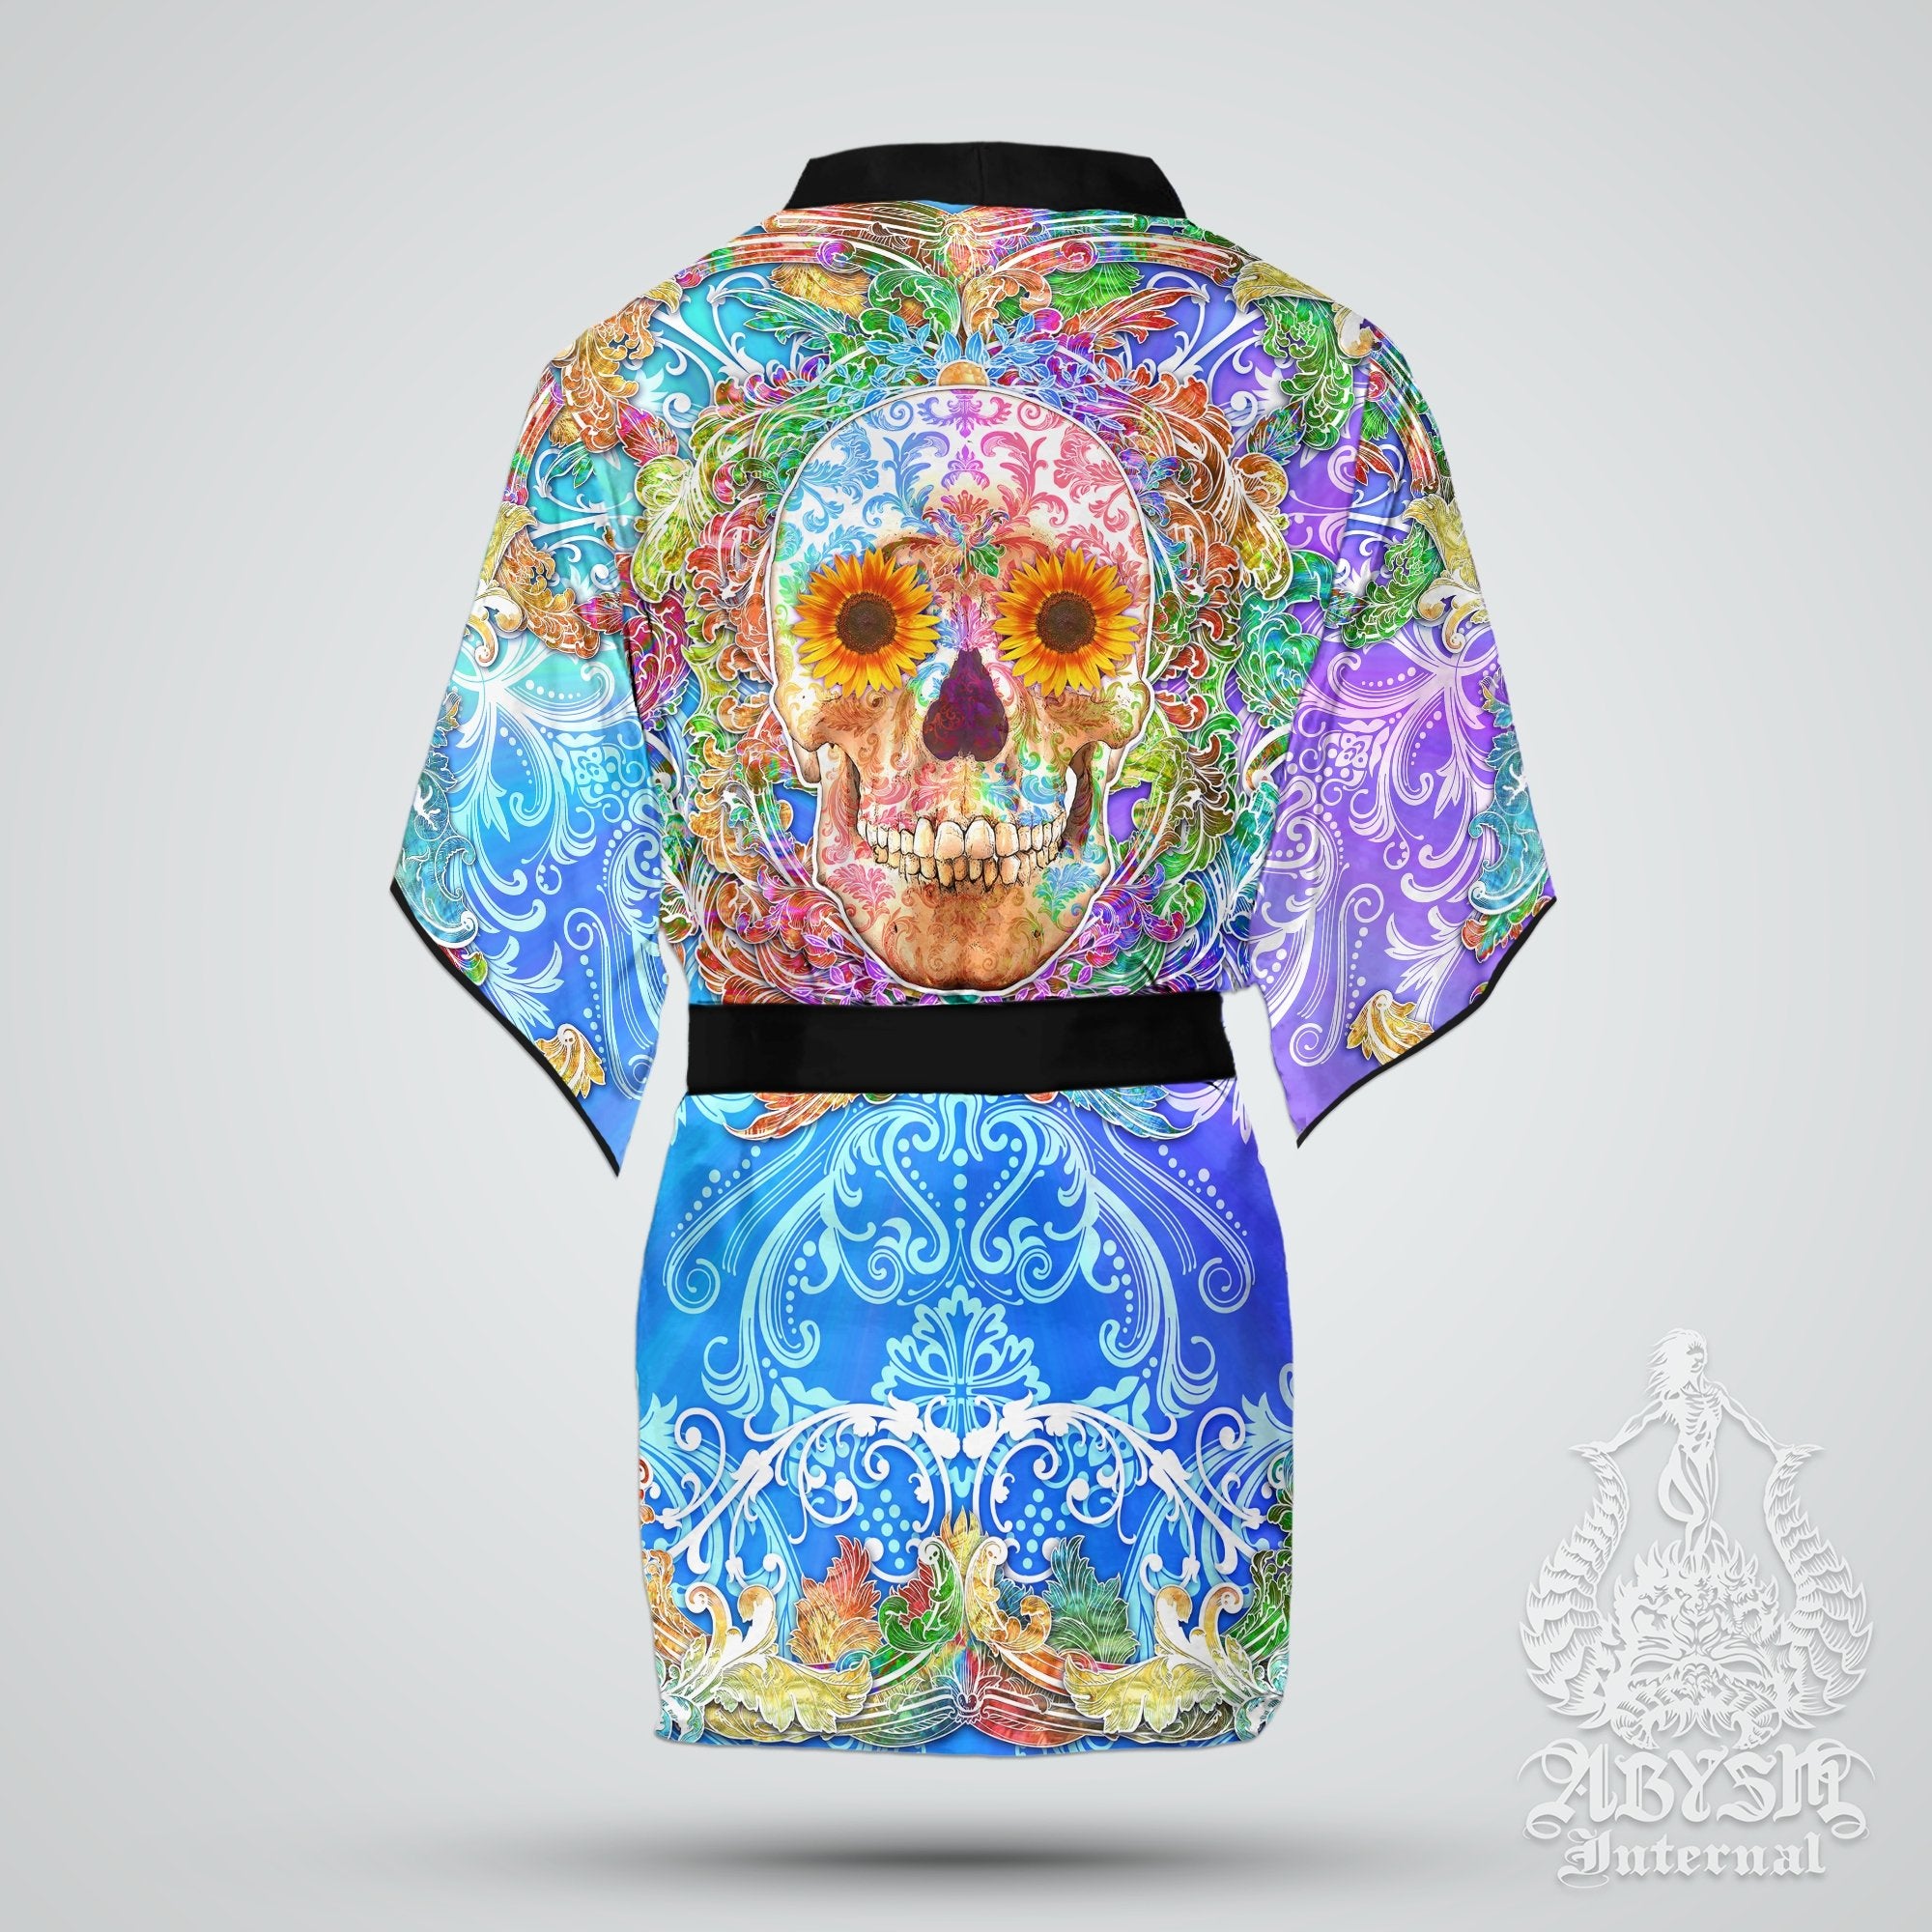 Skull Cover Up, Beach Outfit, Party Kimono, Boho Summer Festival Robe, Indie and Alternative Clothing, Unisex - Psy Color - Abysm Internal